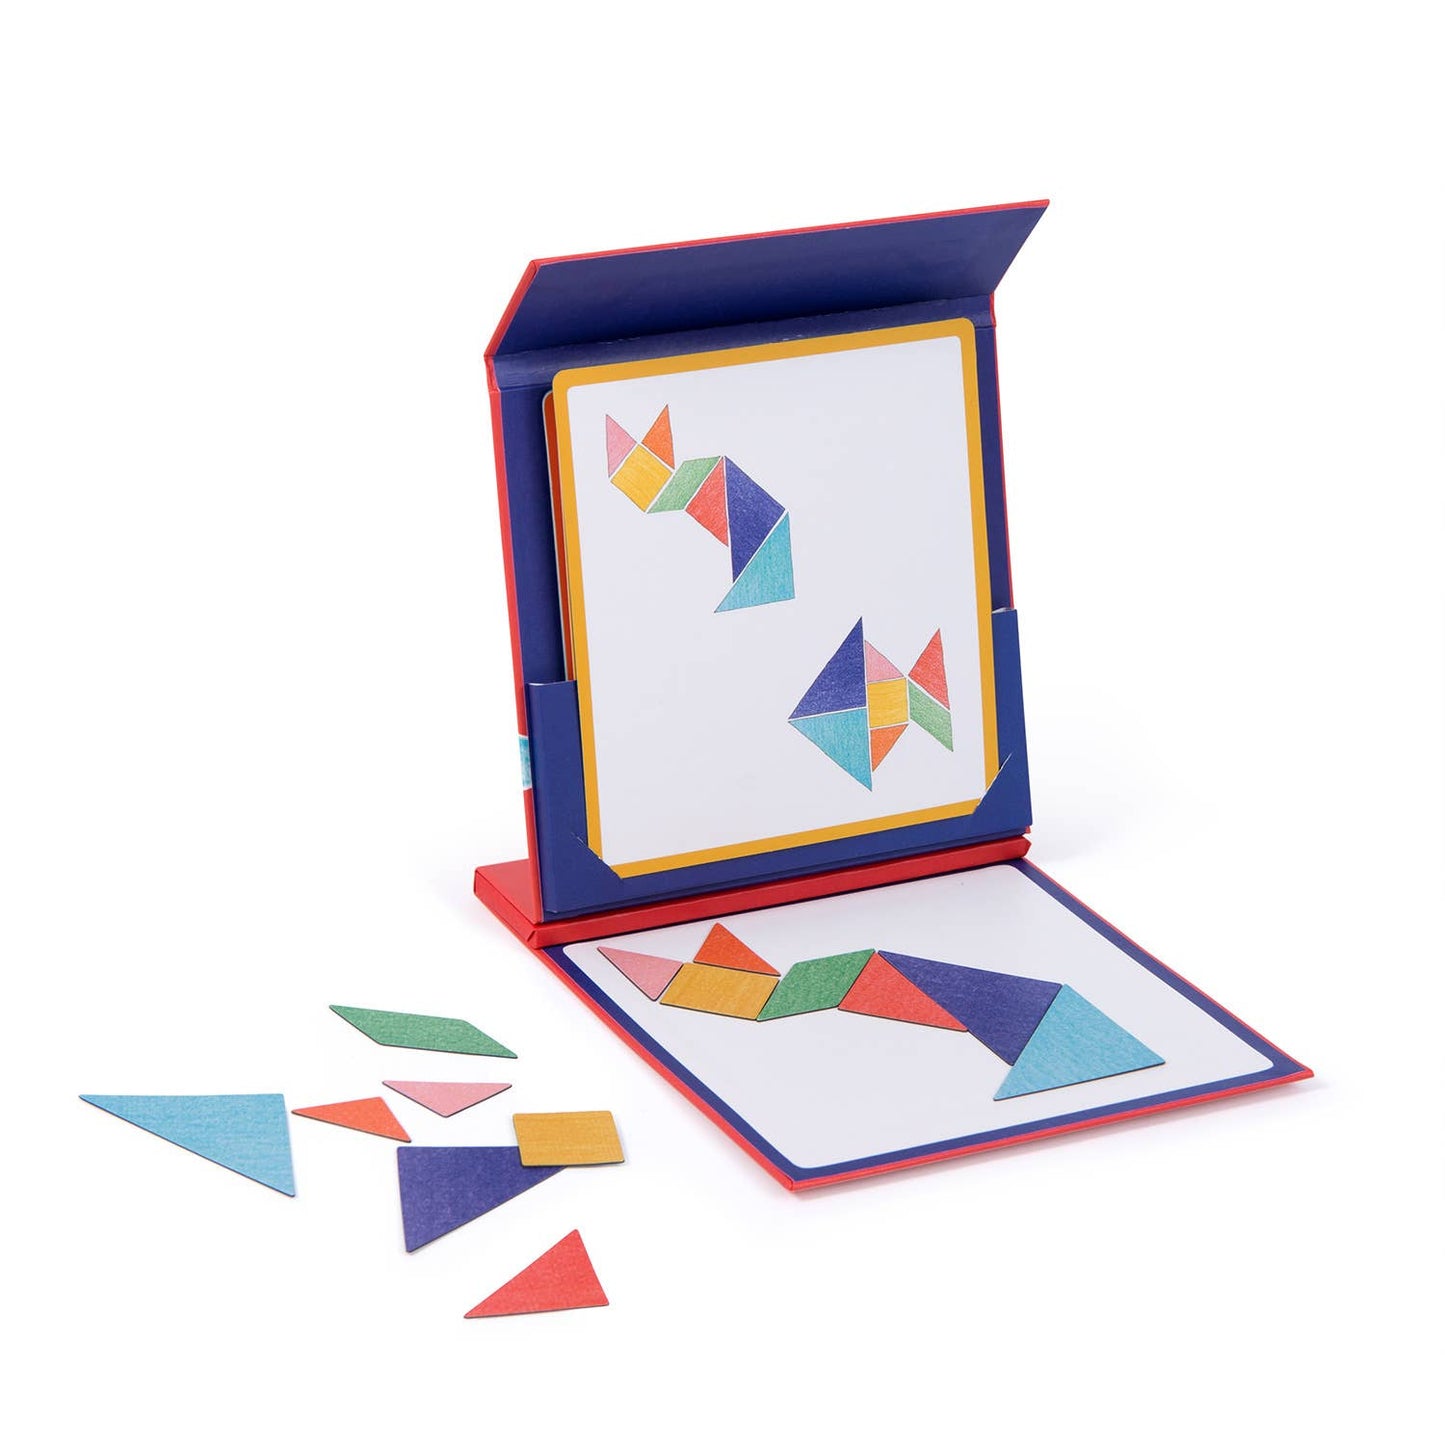 Magnetic tangram /10 - Recreational Toys - Moulin Roty